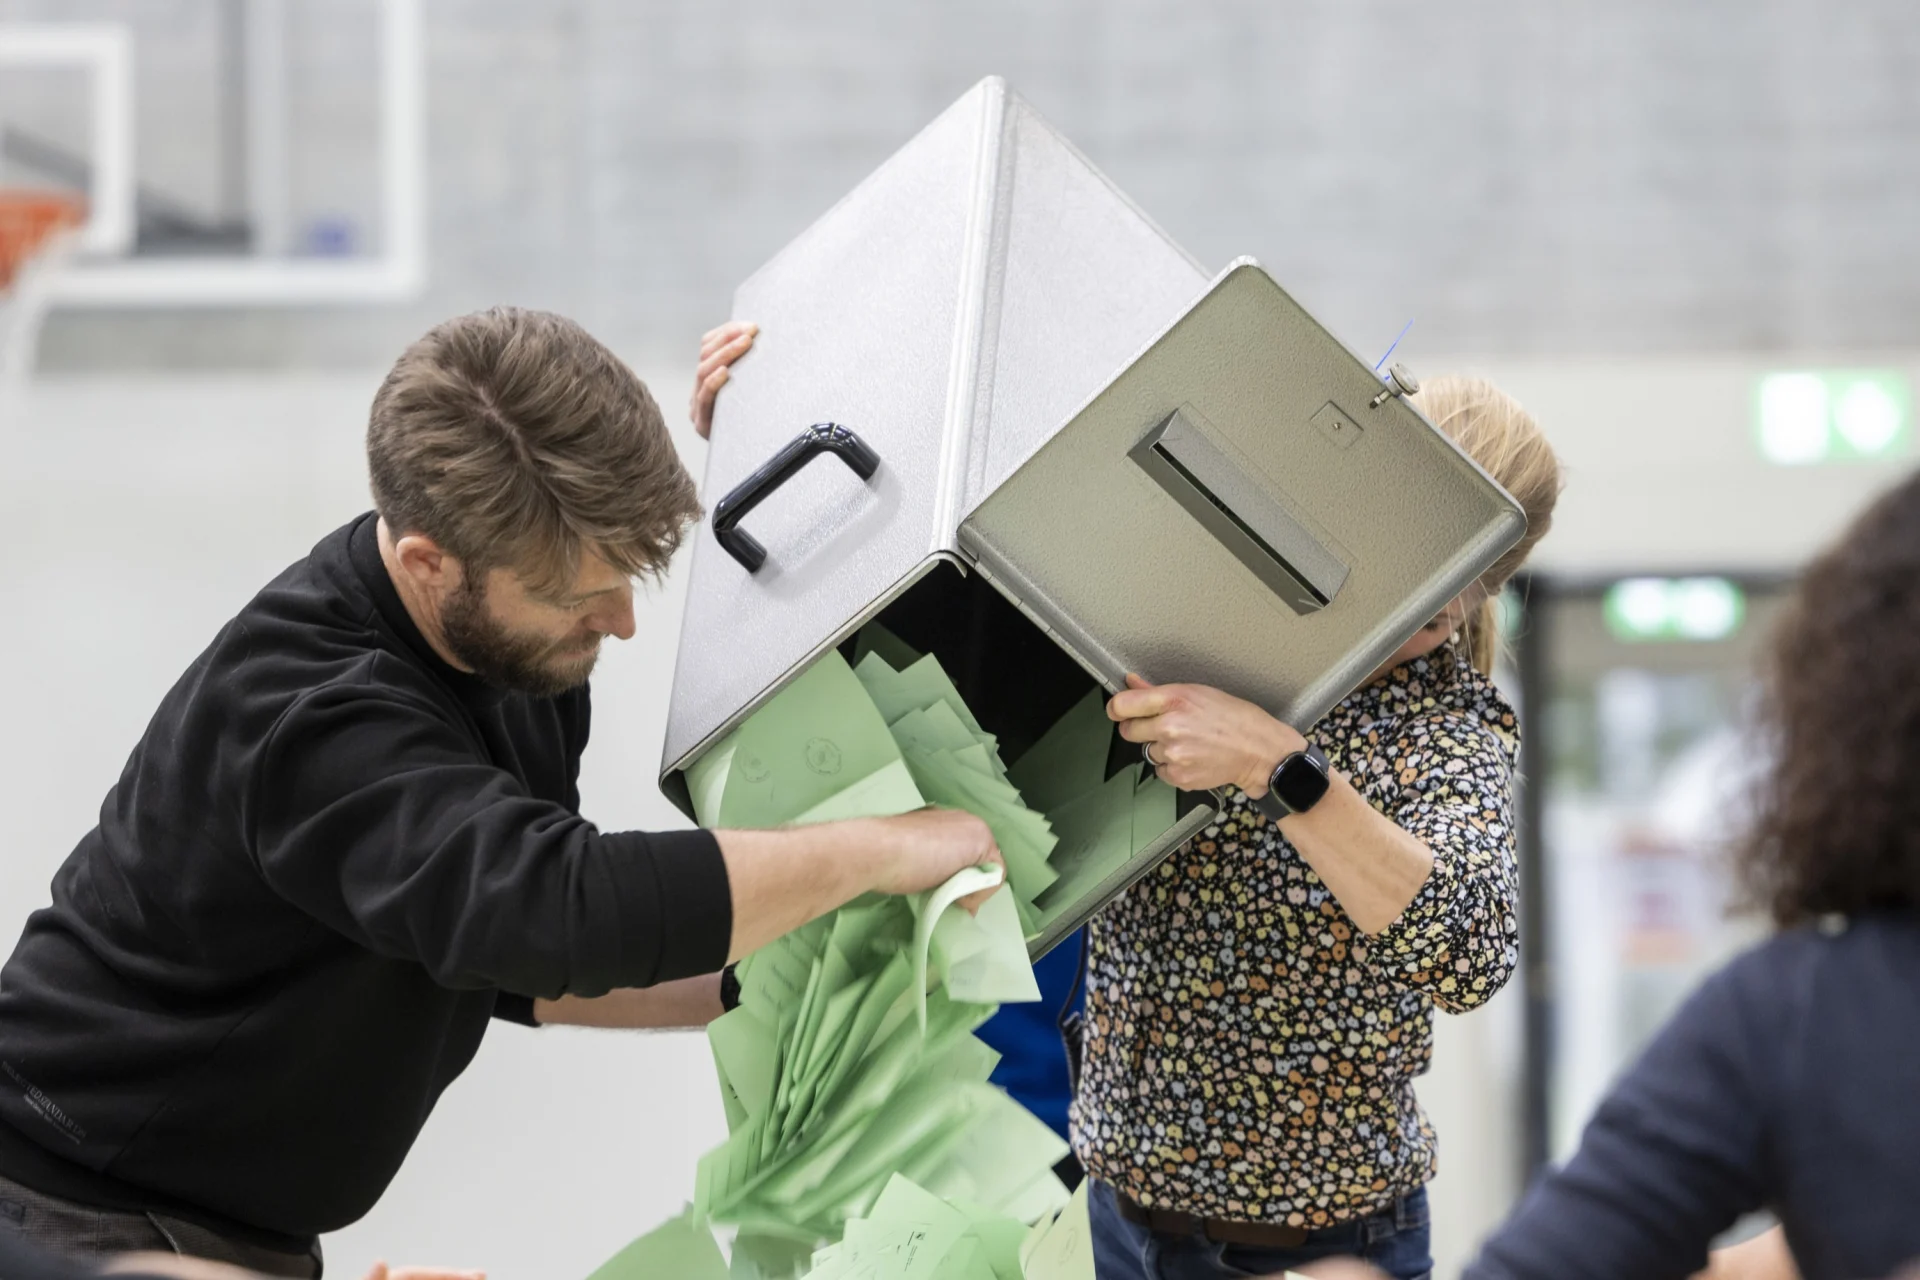 A group of people empty a voting box with voting slips onto a table.